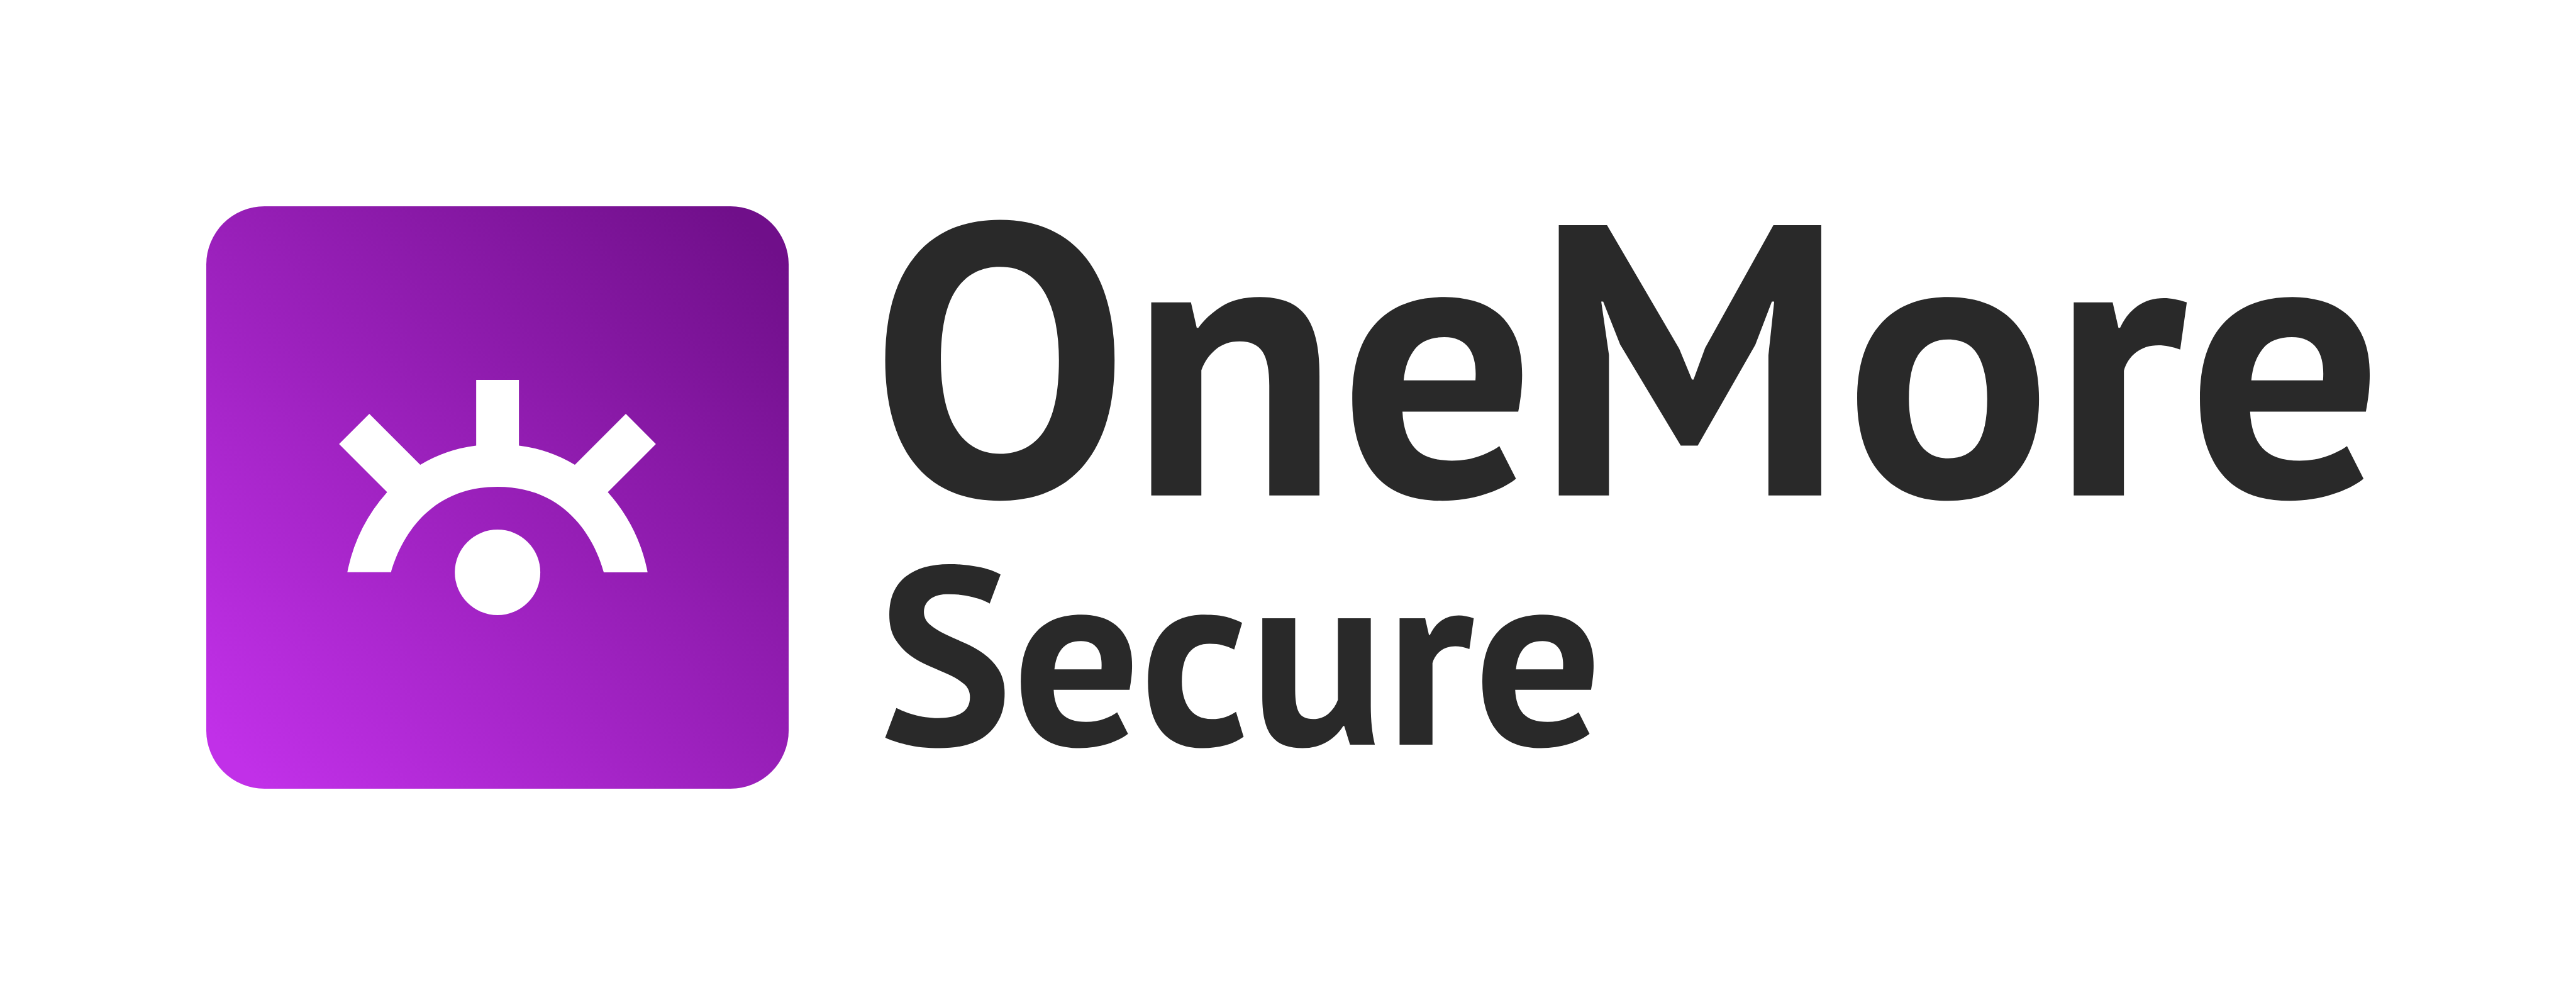 One-more-secure-logo